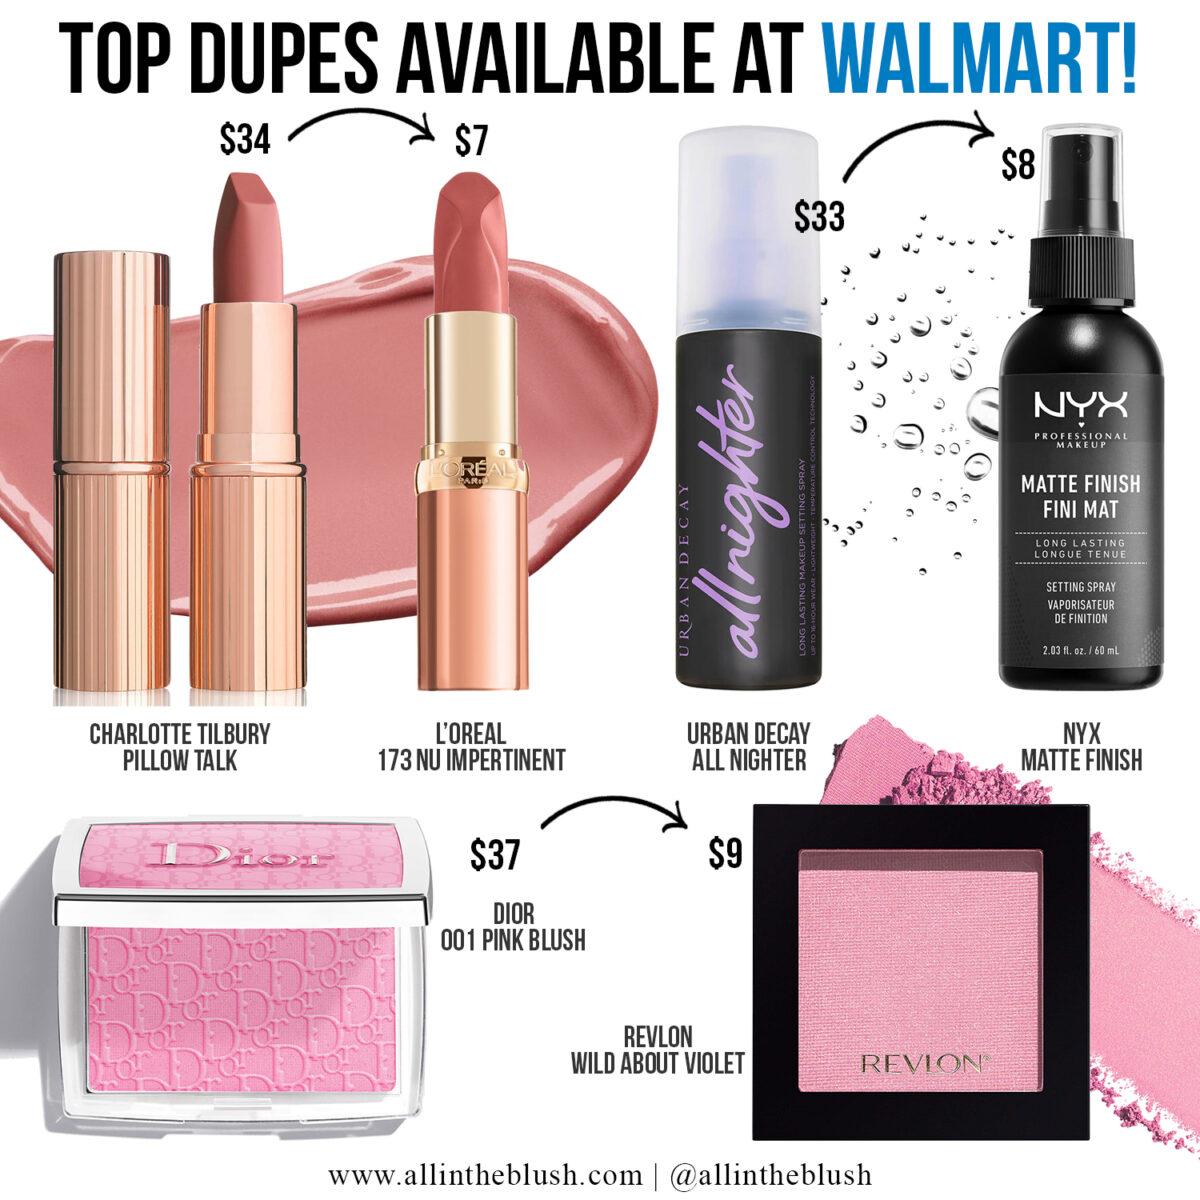 Top Beauty Dupes Available at Walmart!